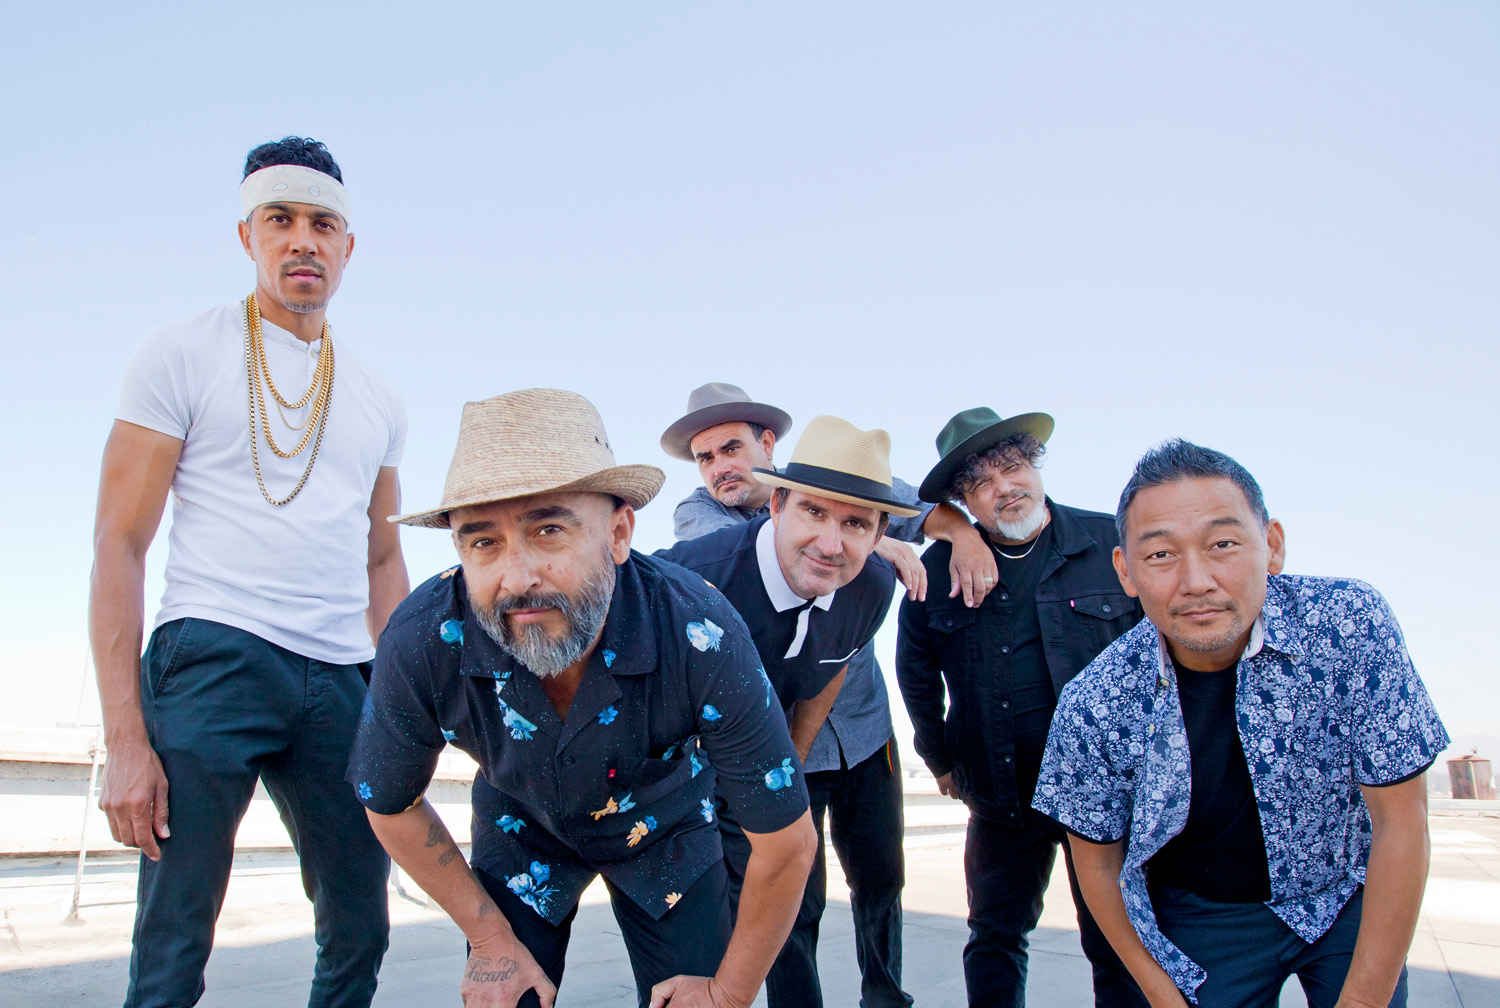 Ozomatli band members standing on building rooftop